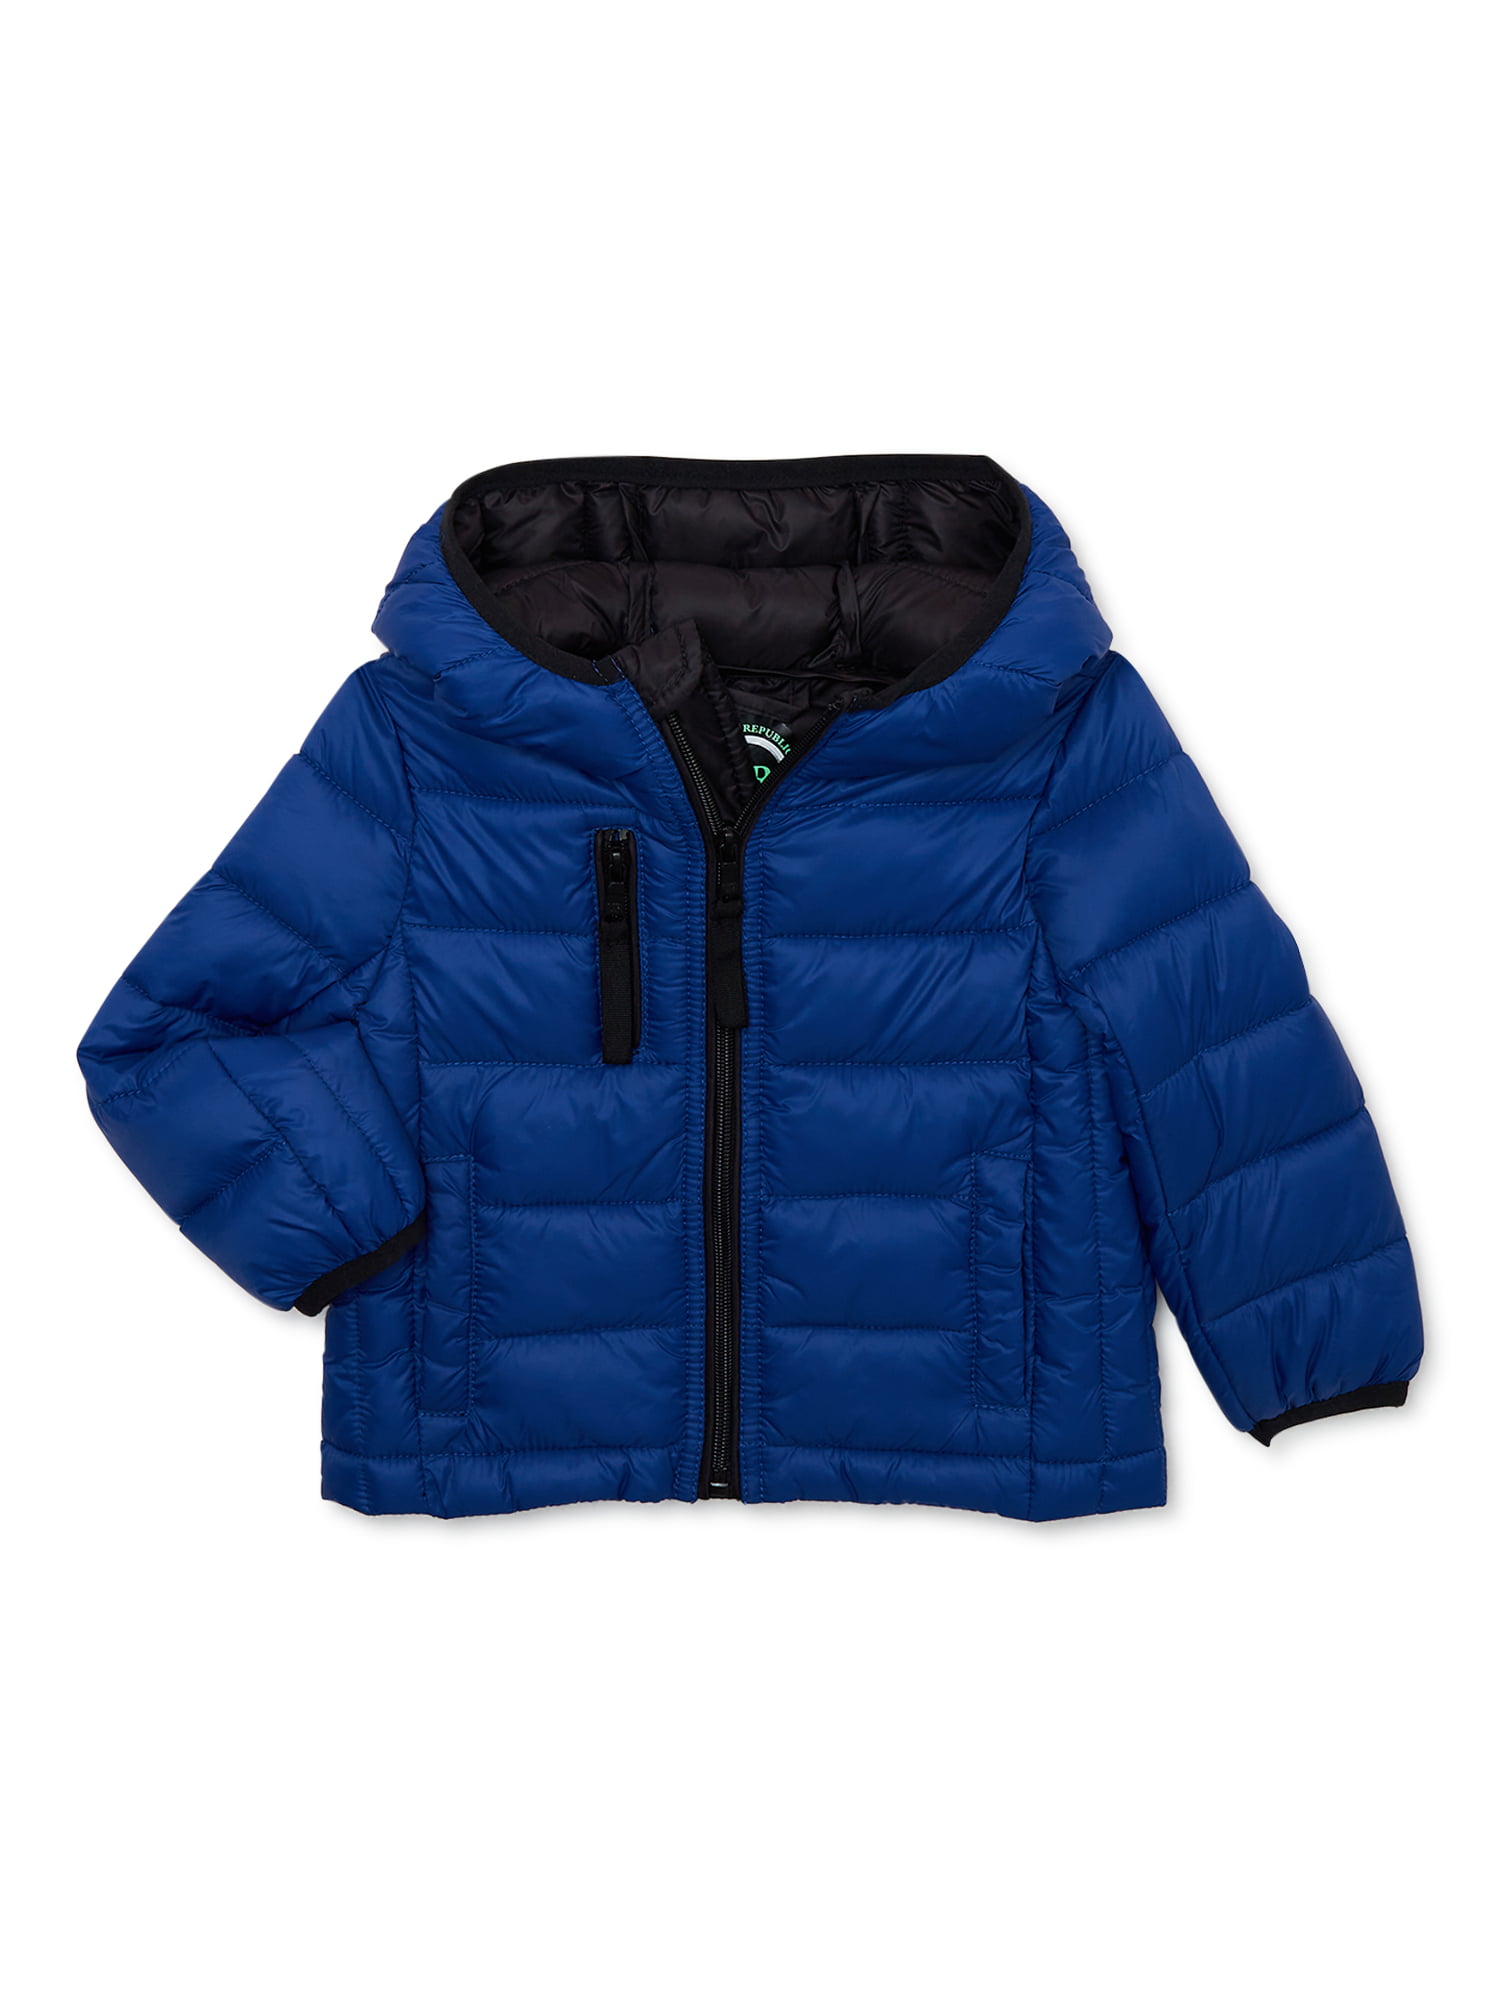 Urban Republic Toddler Boy Packable Quilted Puffer Jacket, Sizes 12M-4T ...